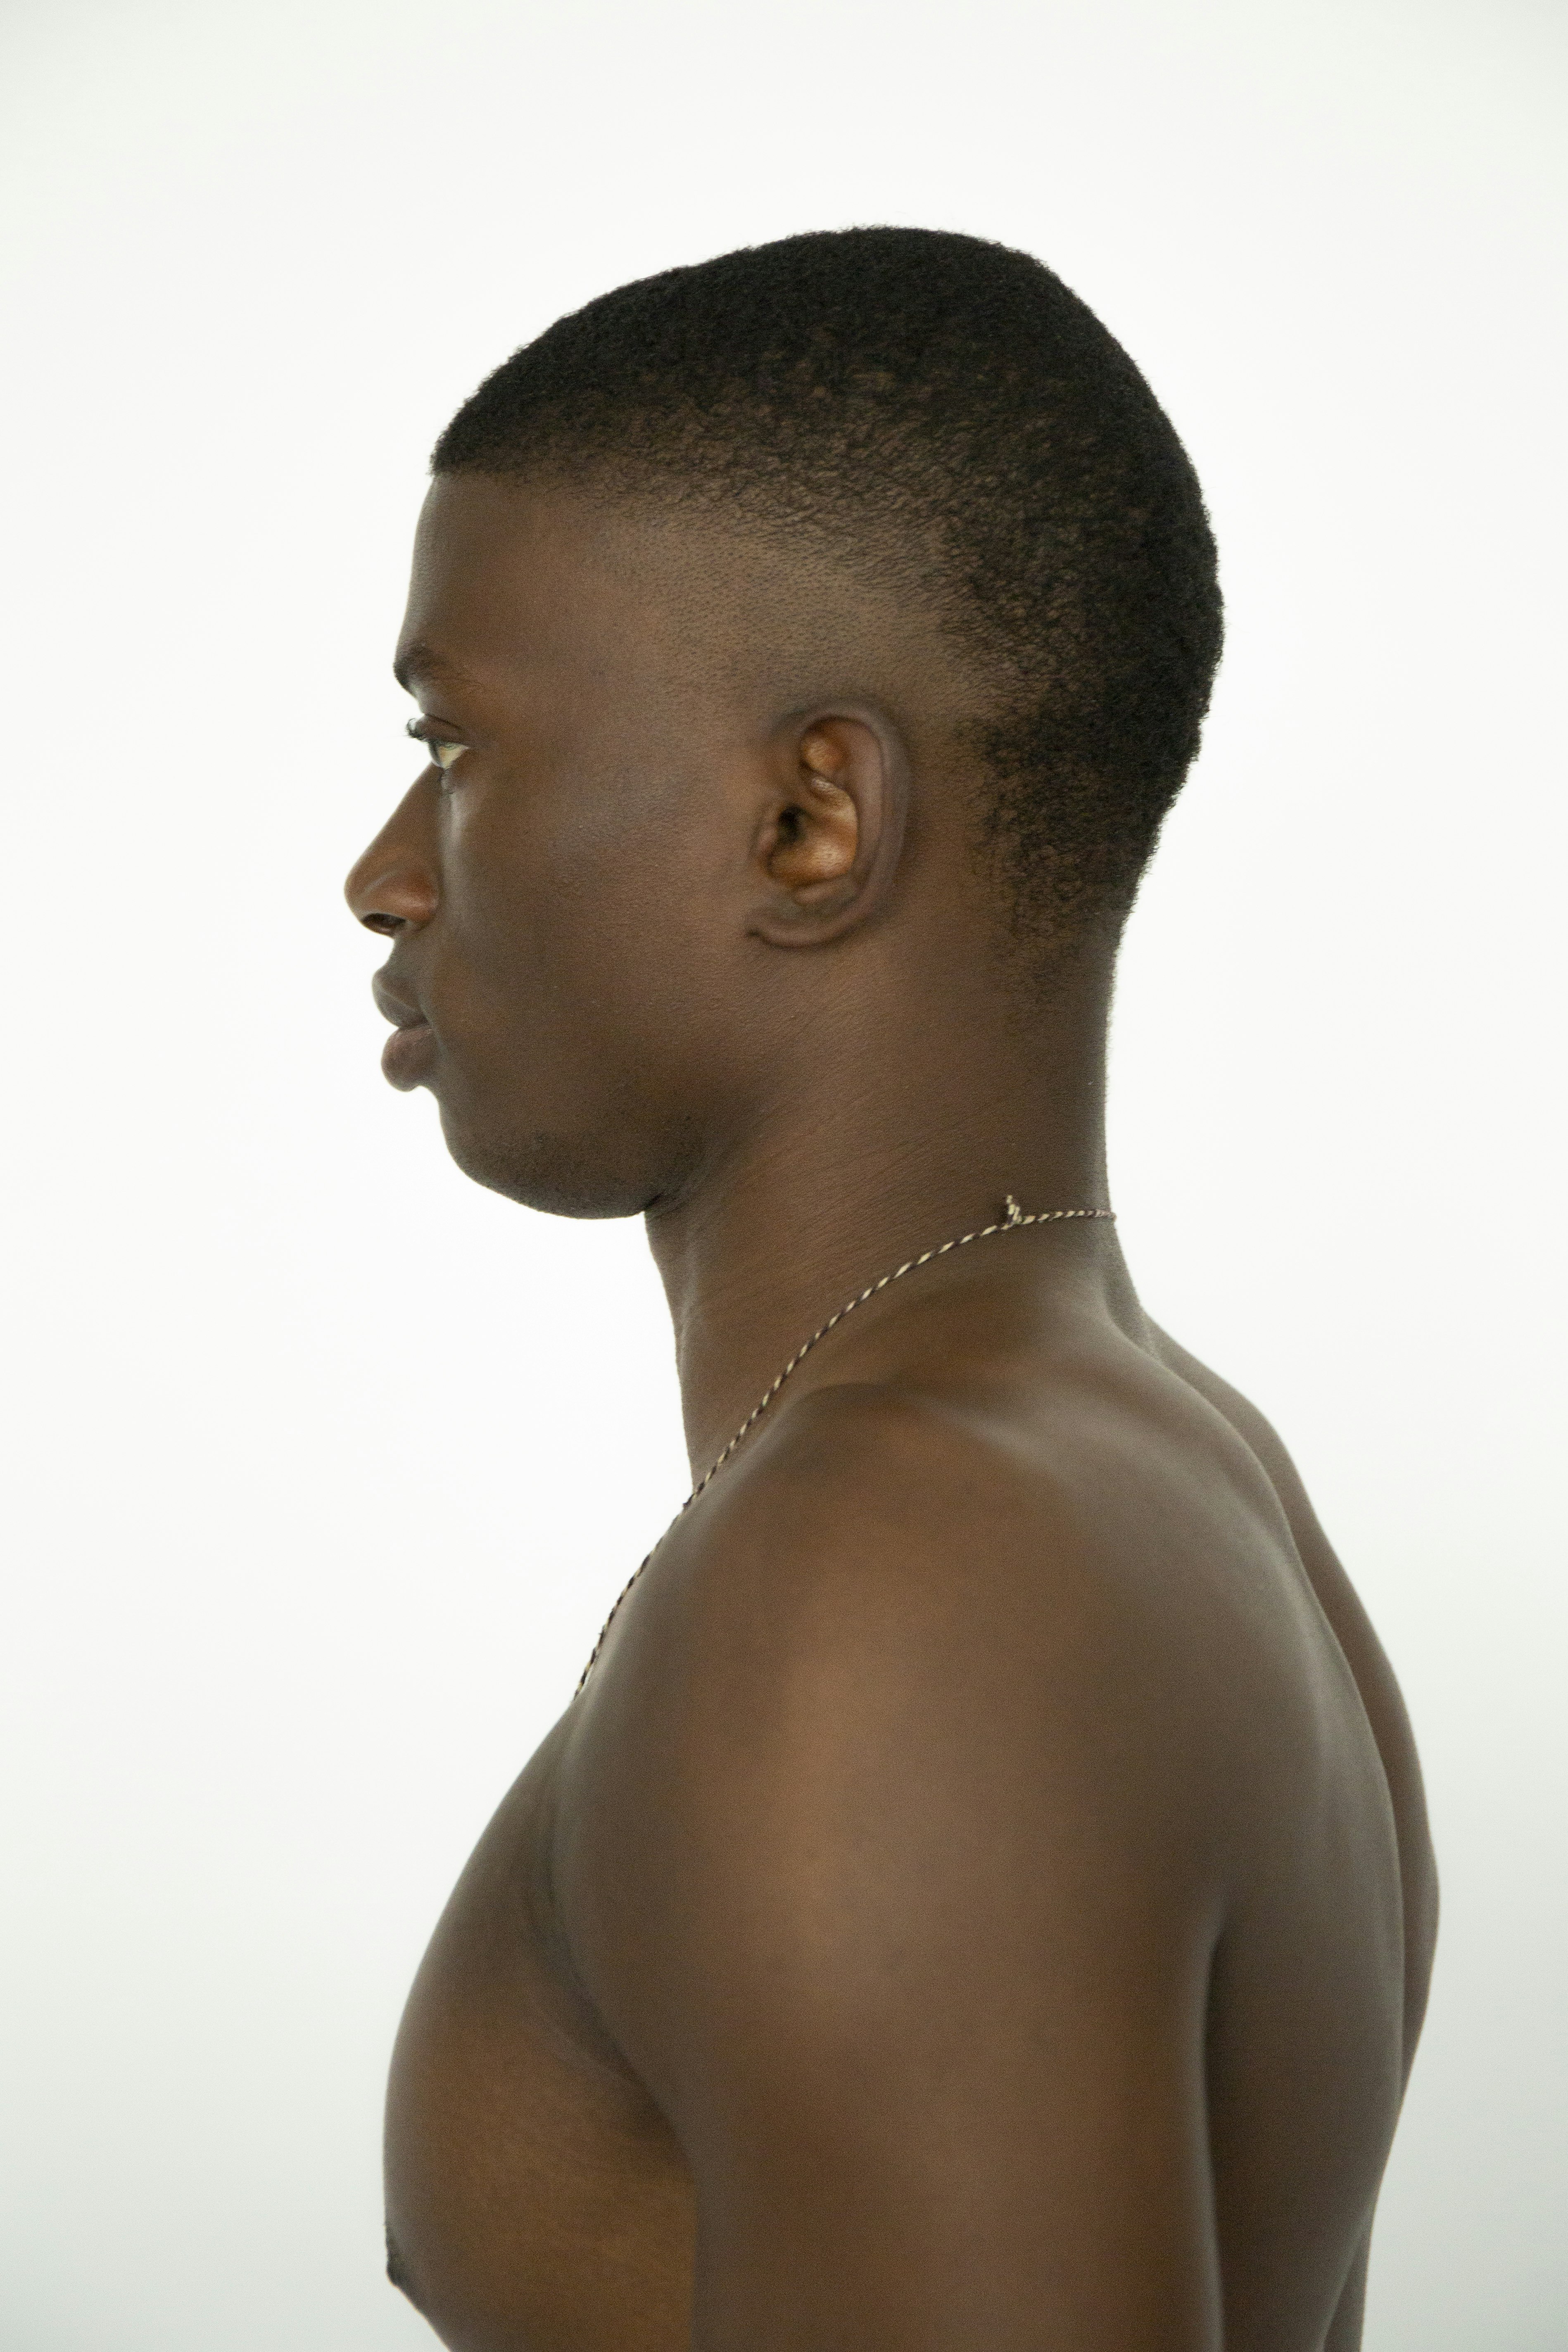 An image of Damie Gbolade